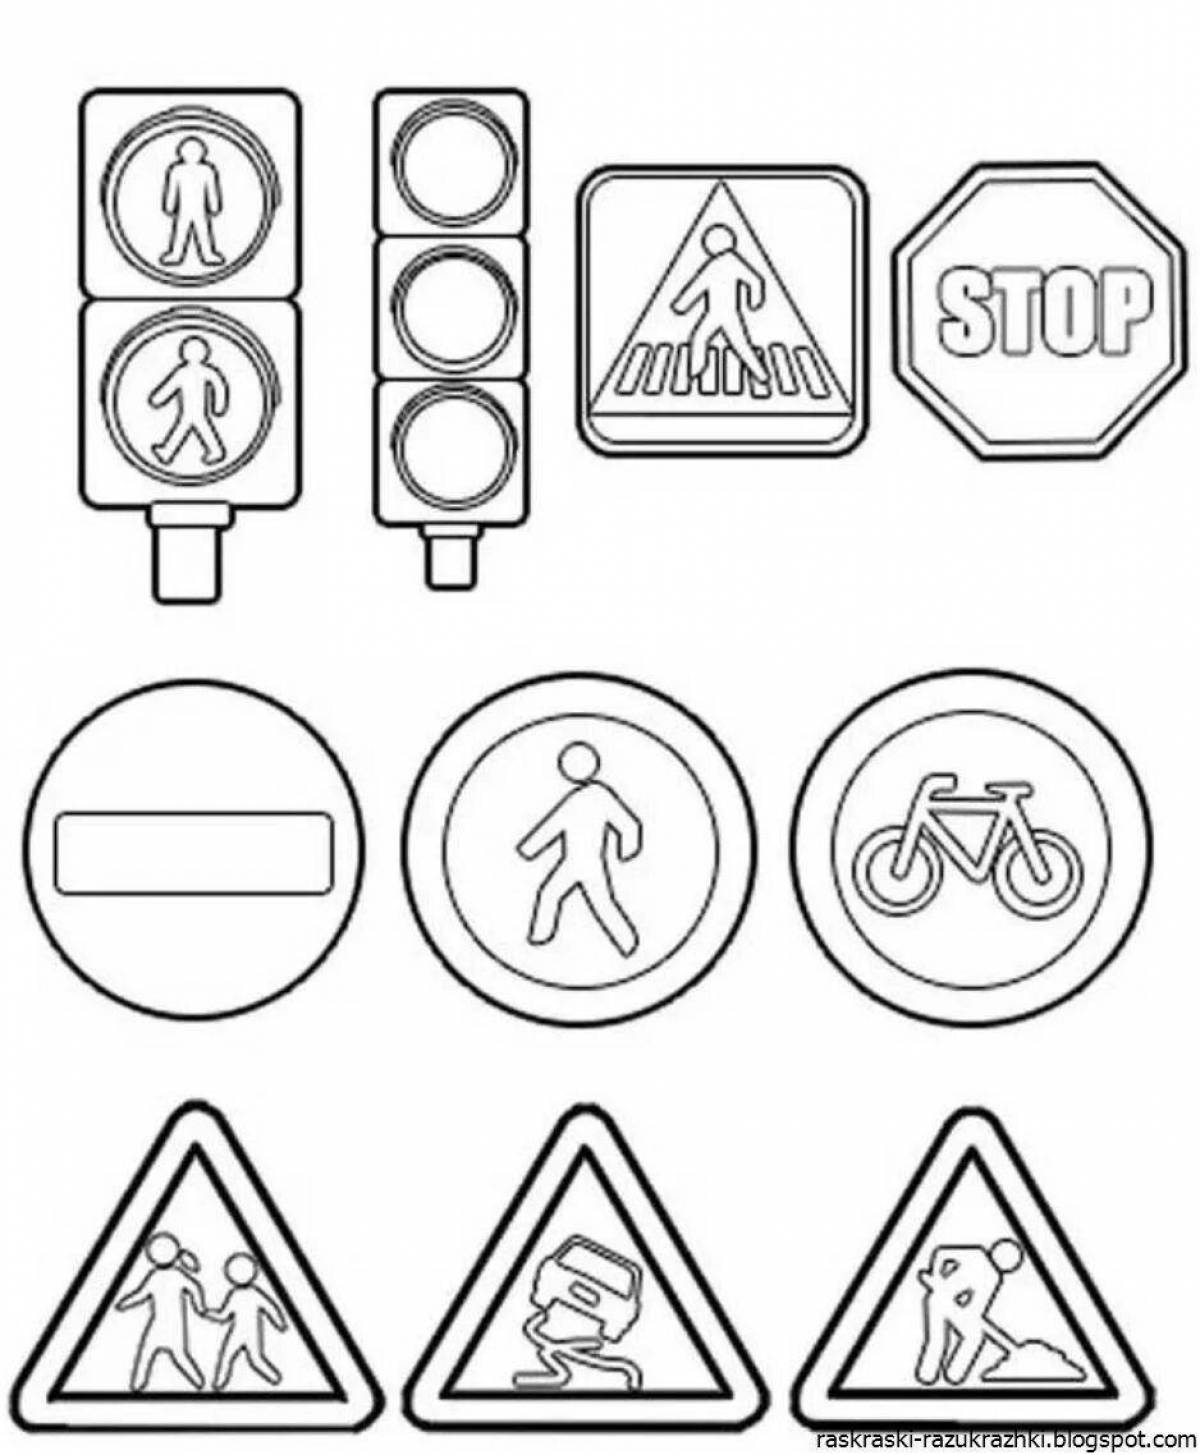 Joyful road signs coloring pages for kids